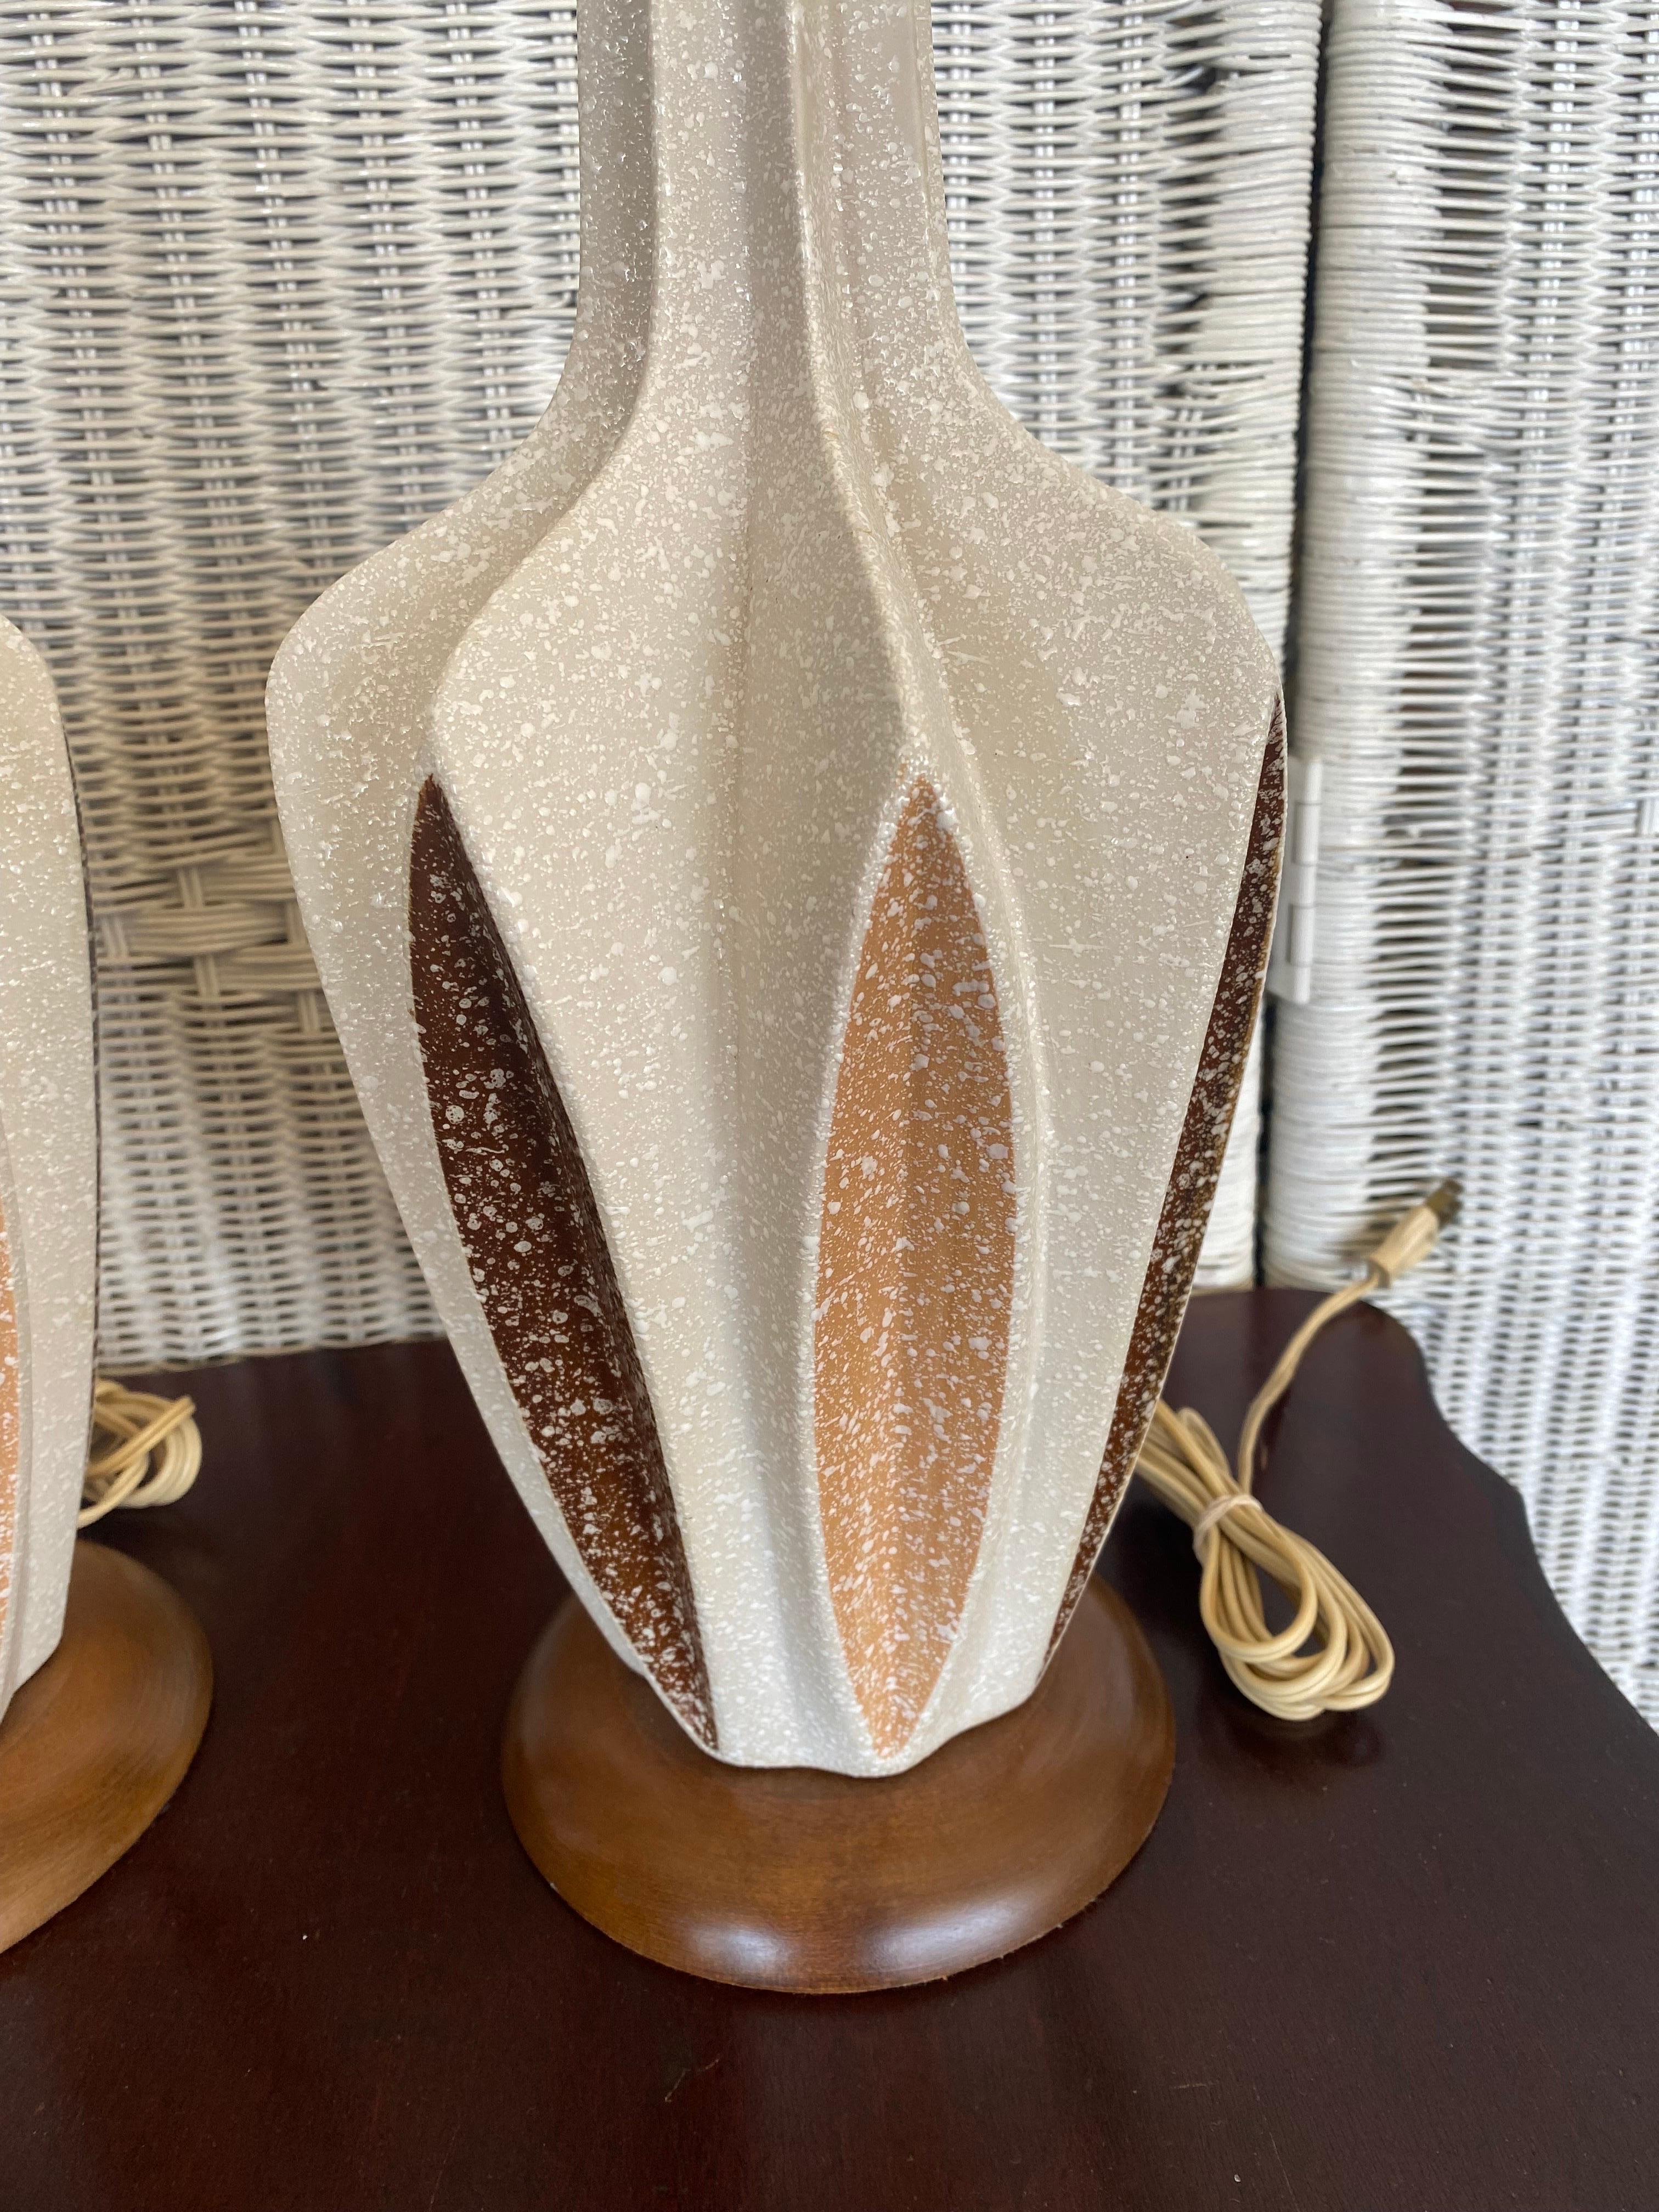 1960s Modern Italian Ceramic Lamps, a Pair In Good Condition For Sale In San Carlos, CA